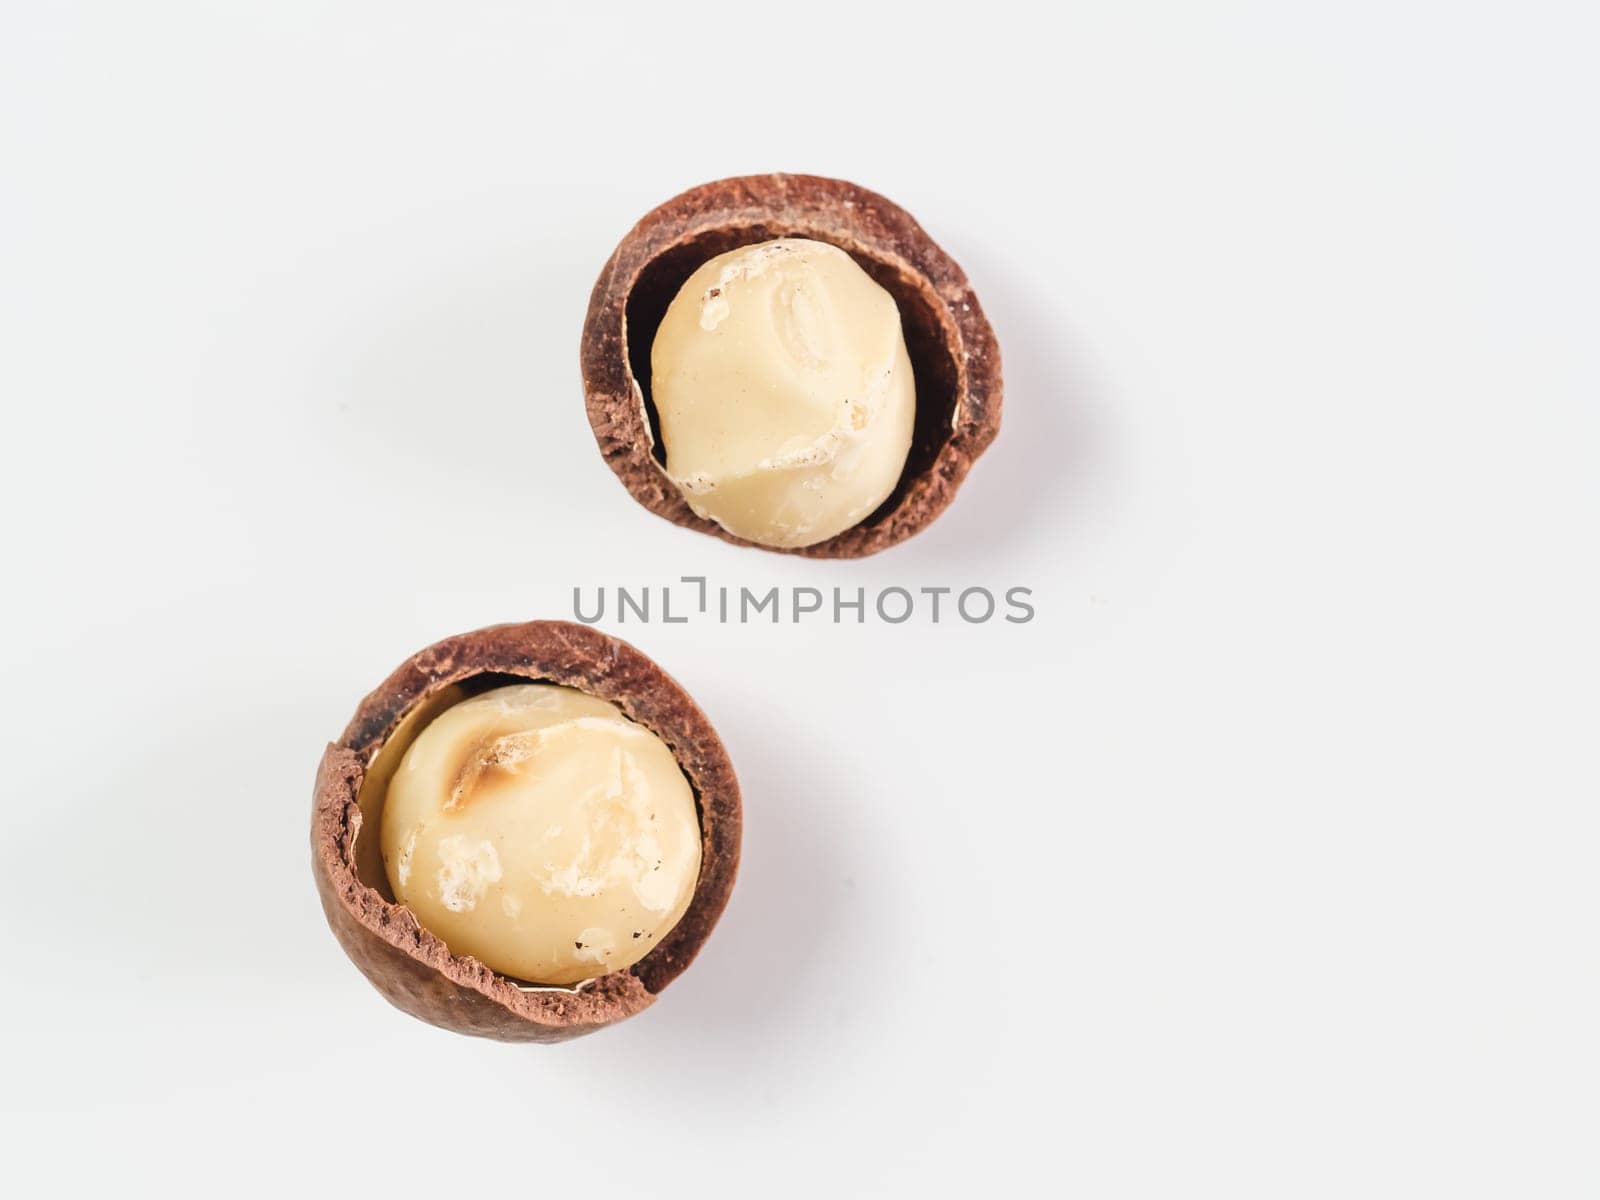 Two peeled macadamia nuts on white background. Set of two macadamia nuts with open shells, isolated on white, top view or flat lay. Copy space for text.